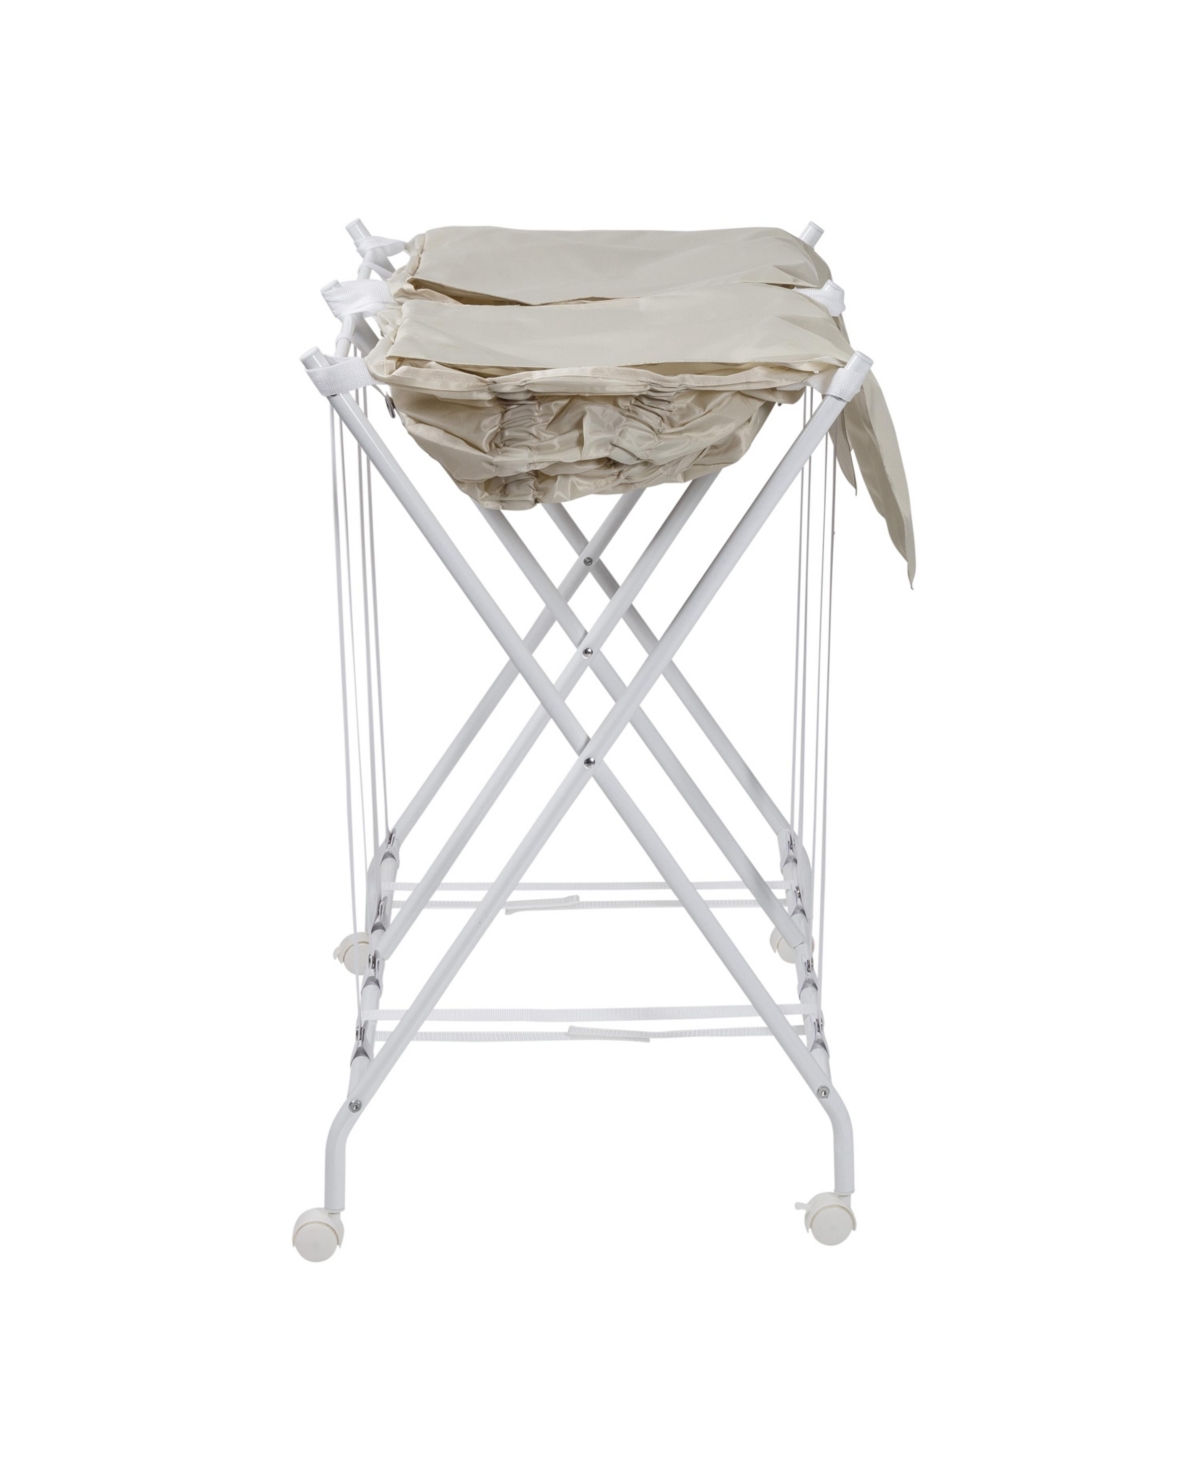 Shop Honey Can Do Double Bounce Back Hamper Foldable Bag Laundry Sorter On Wheels With Lid, Set Of 2 In White